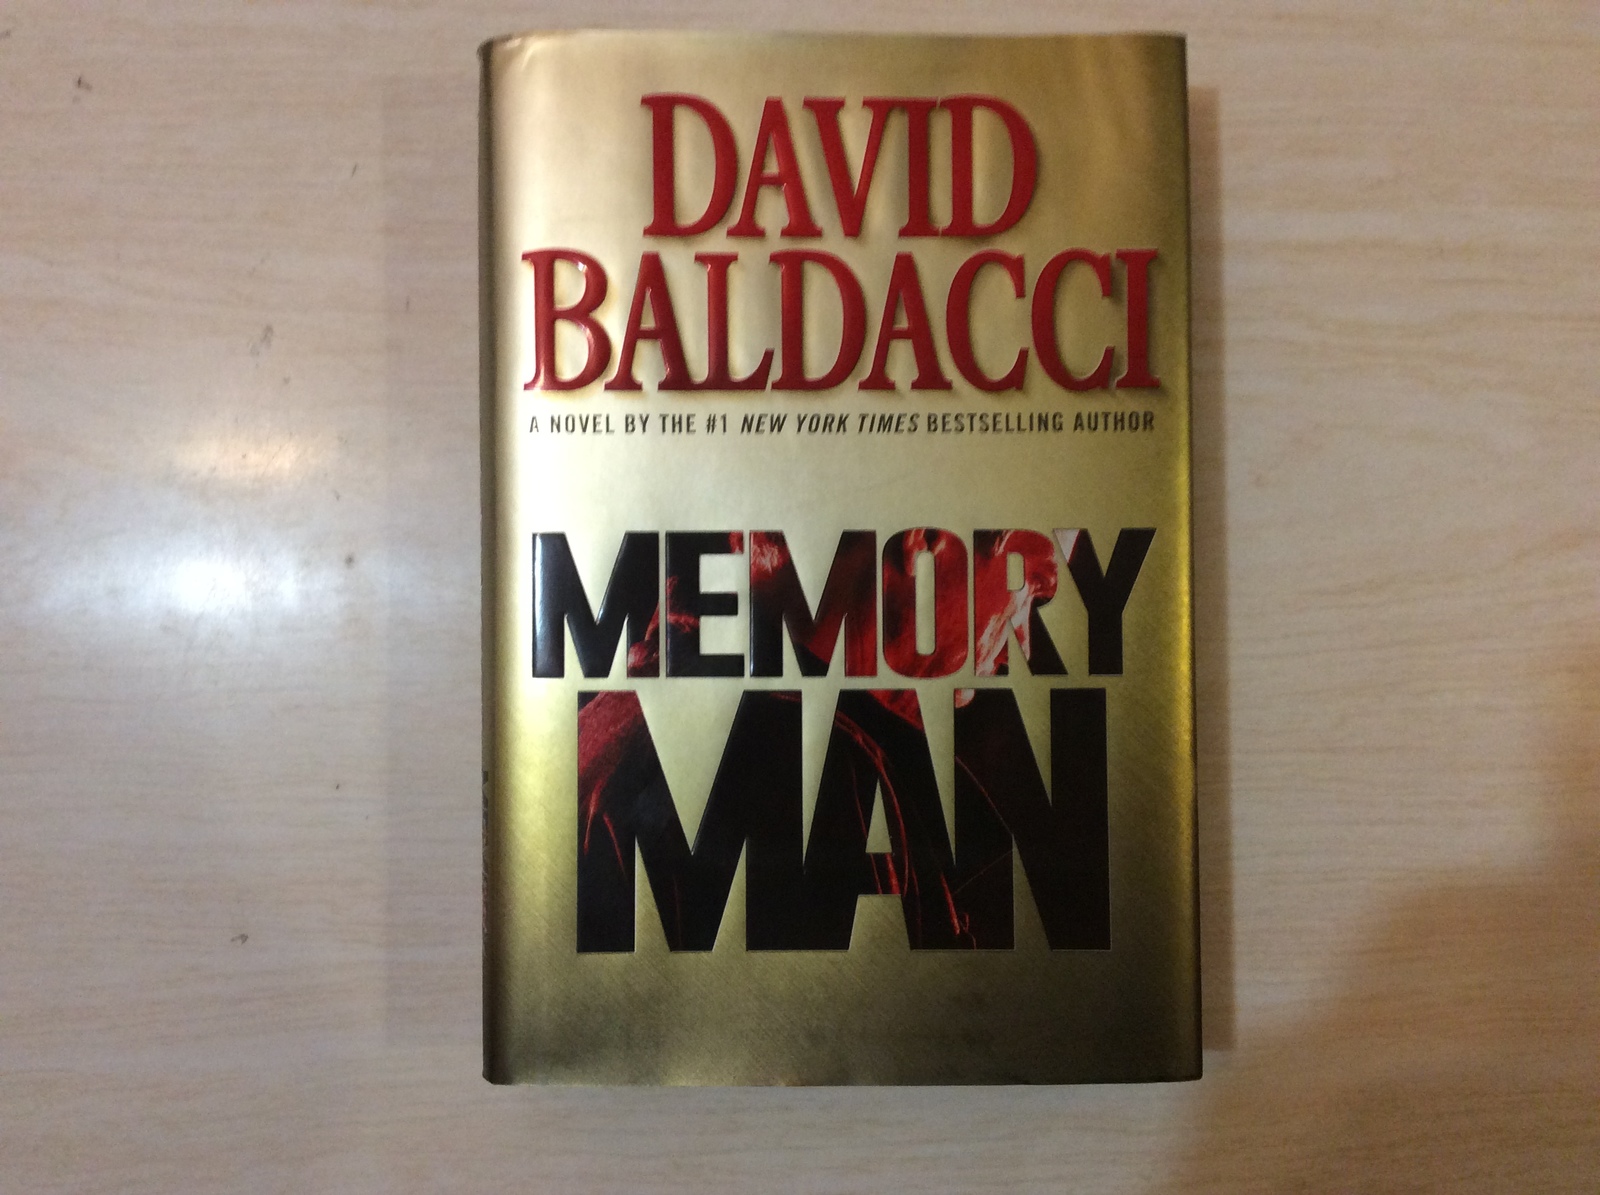 Primary image for MEMORY MAN by DAVID BALDACCI - Hardcover - First Edition - Free Shipping